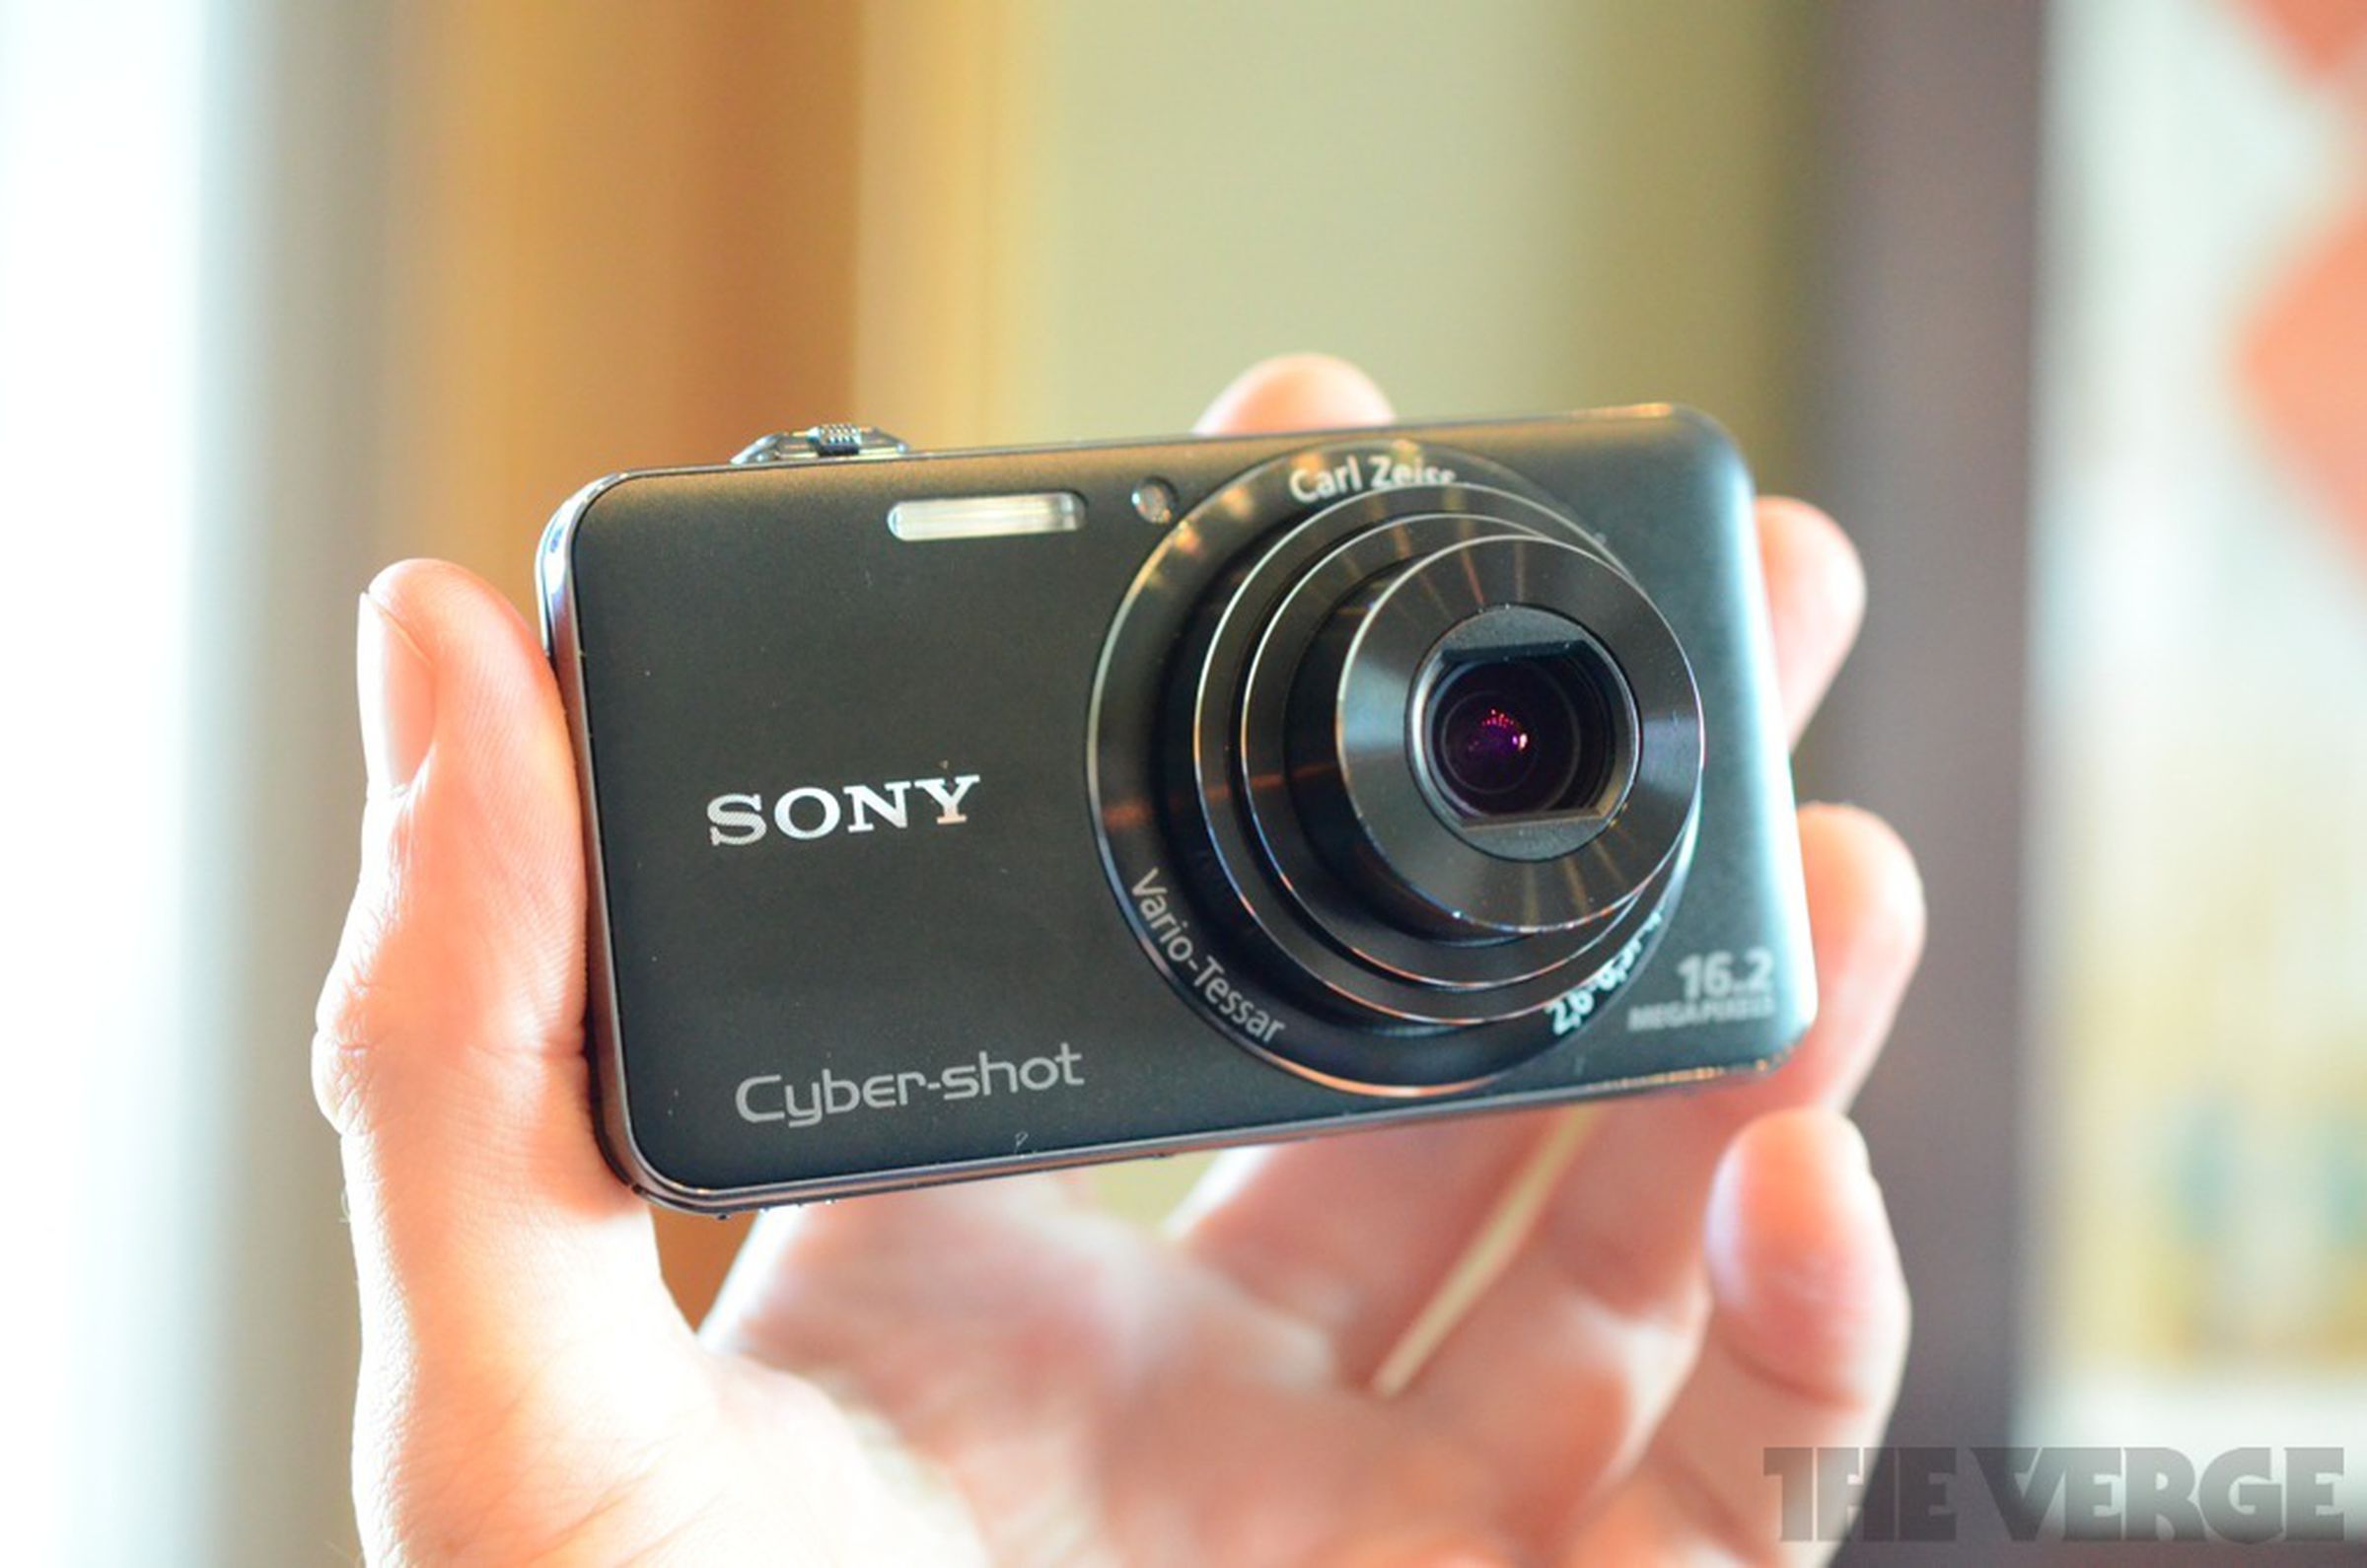 Sony Cyber-shot February 2012 refresh pictures